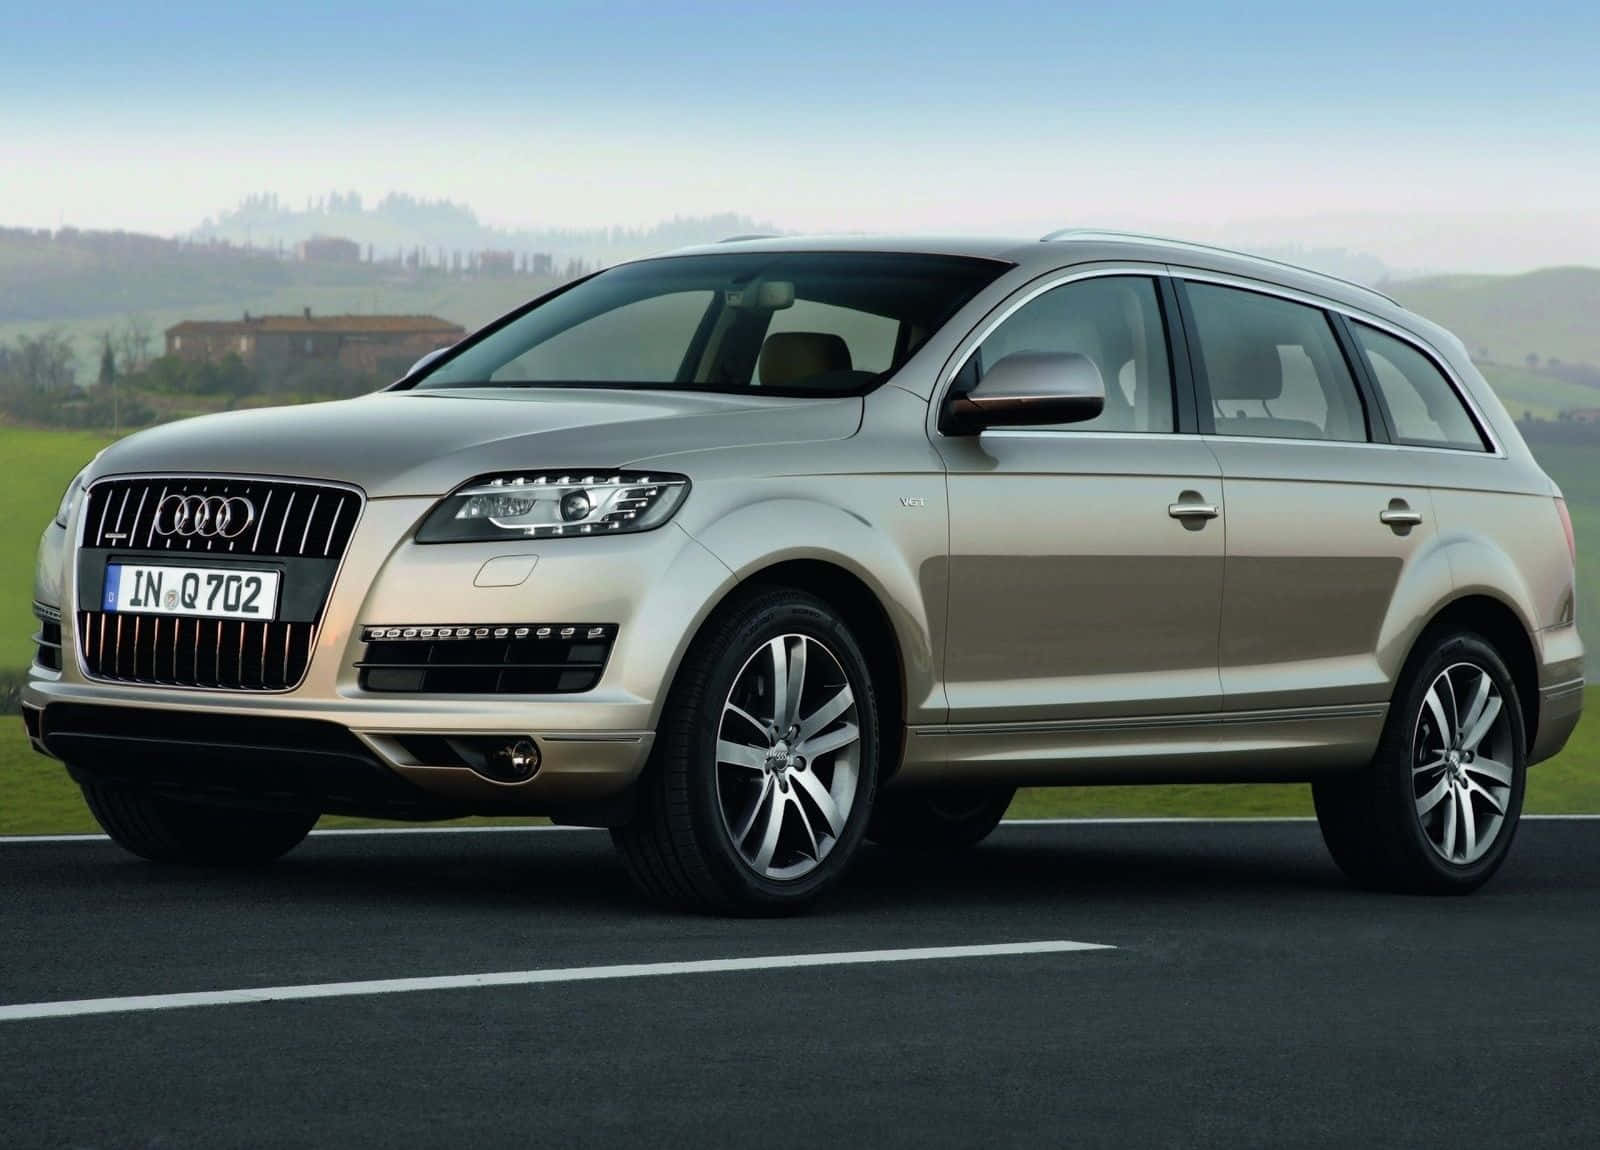 Caption: Audi Q7 - A Stunning Display of Luxury and Performance Wallpaper